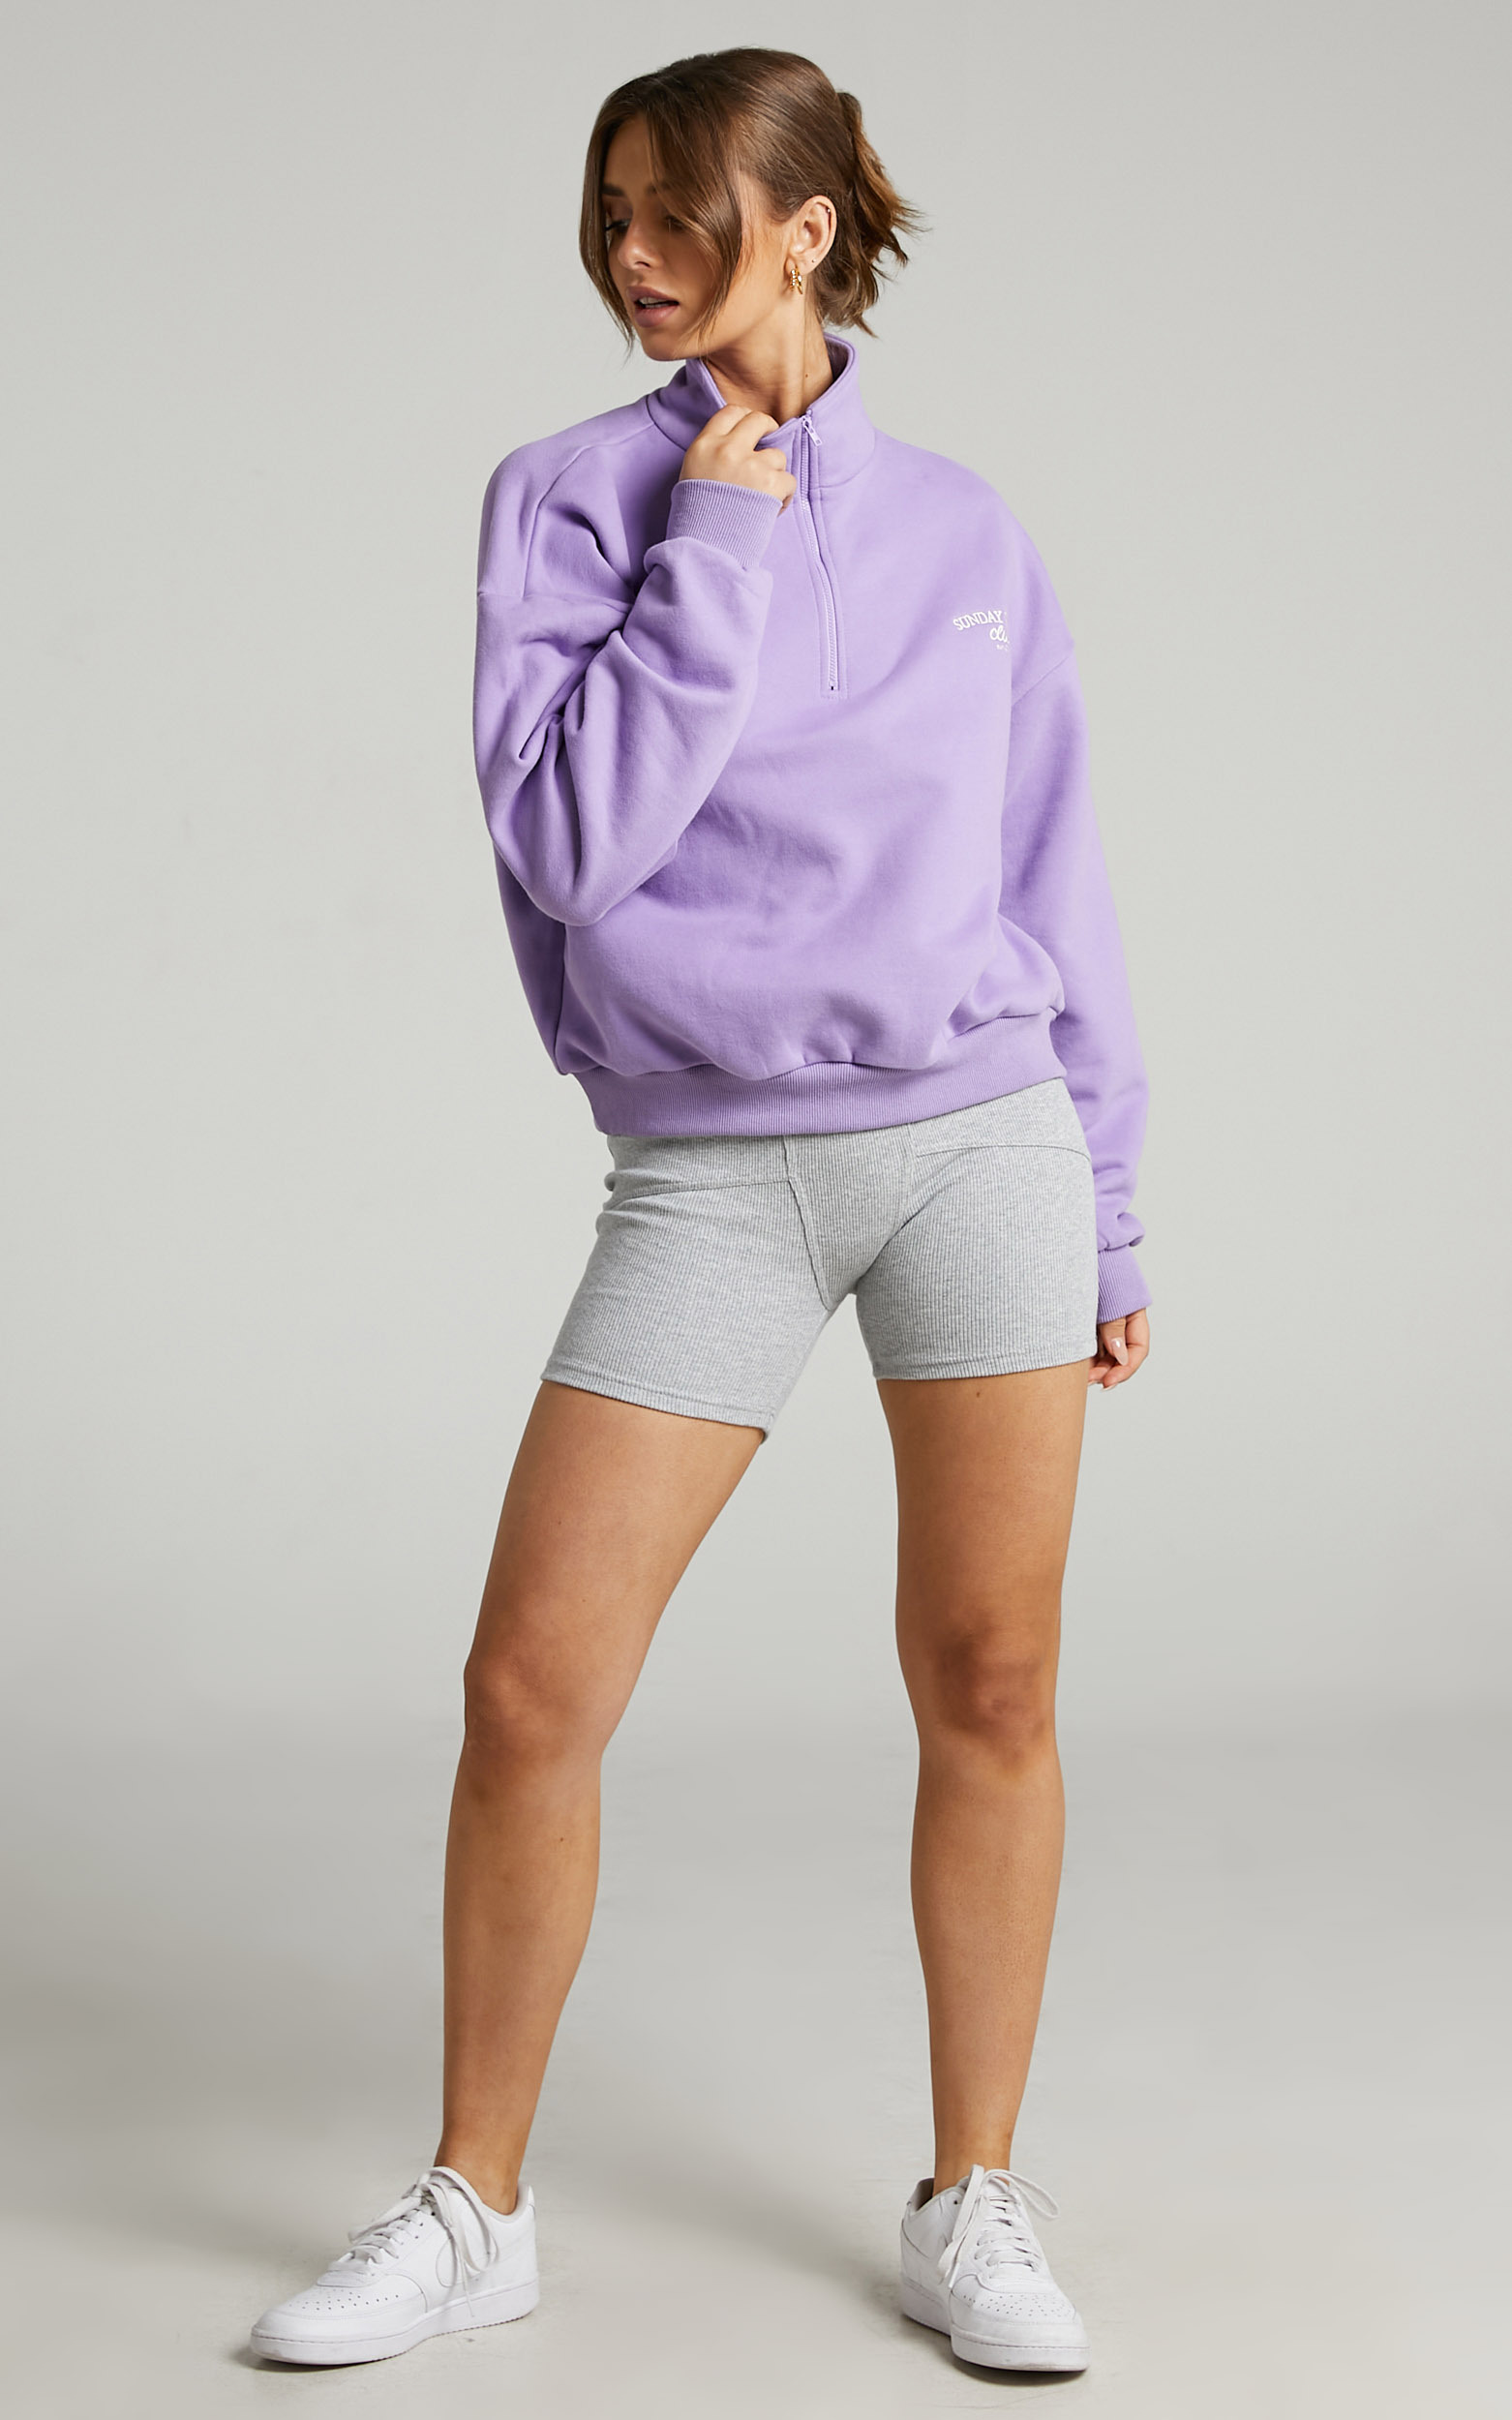 Sunday Society Club - Francisa High Neck Oversized Sweatshirt in Lilac - 06, PRP2, hi-res image number null